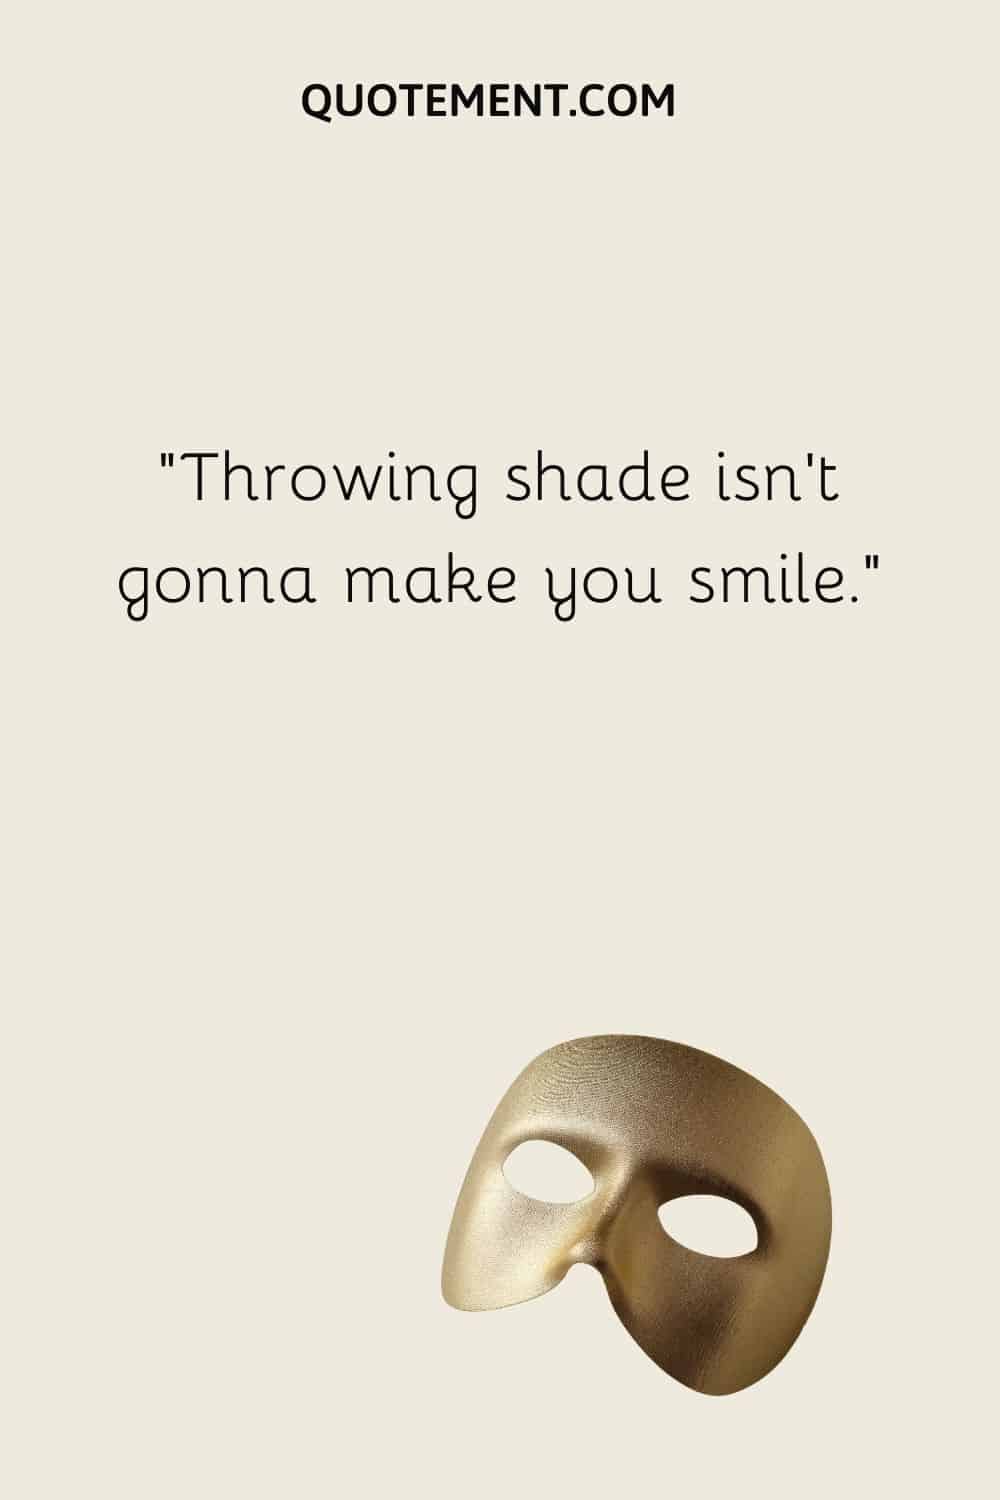 steel mask image representing throwing shade quote